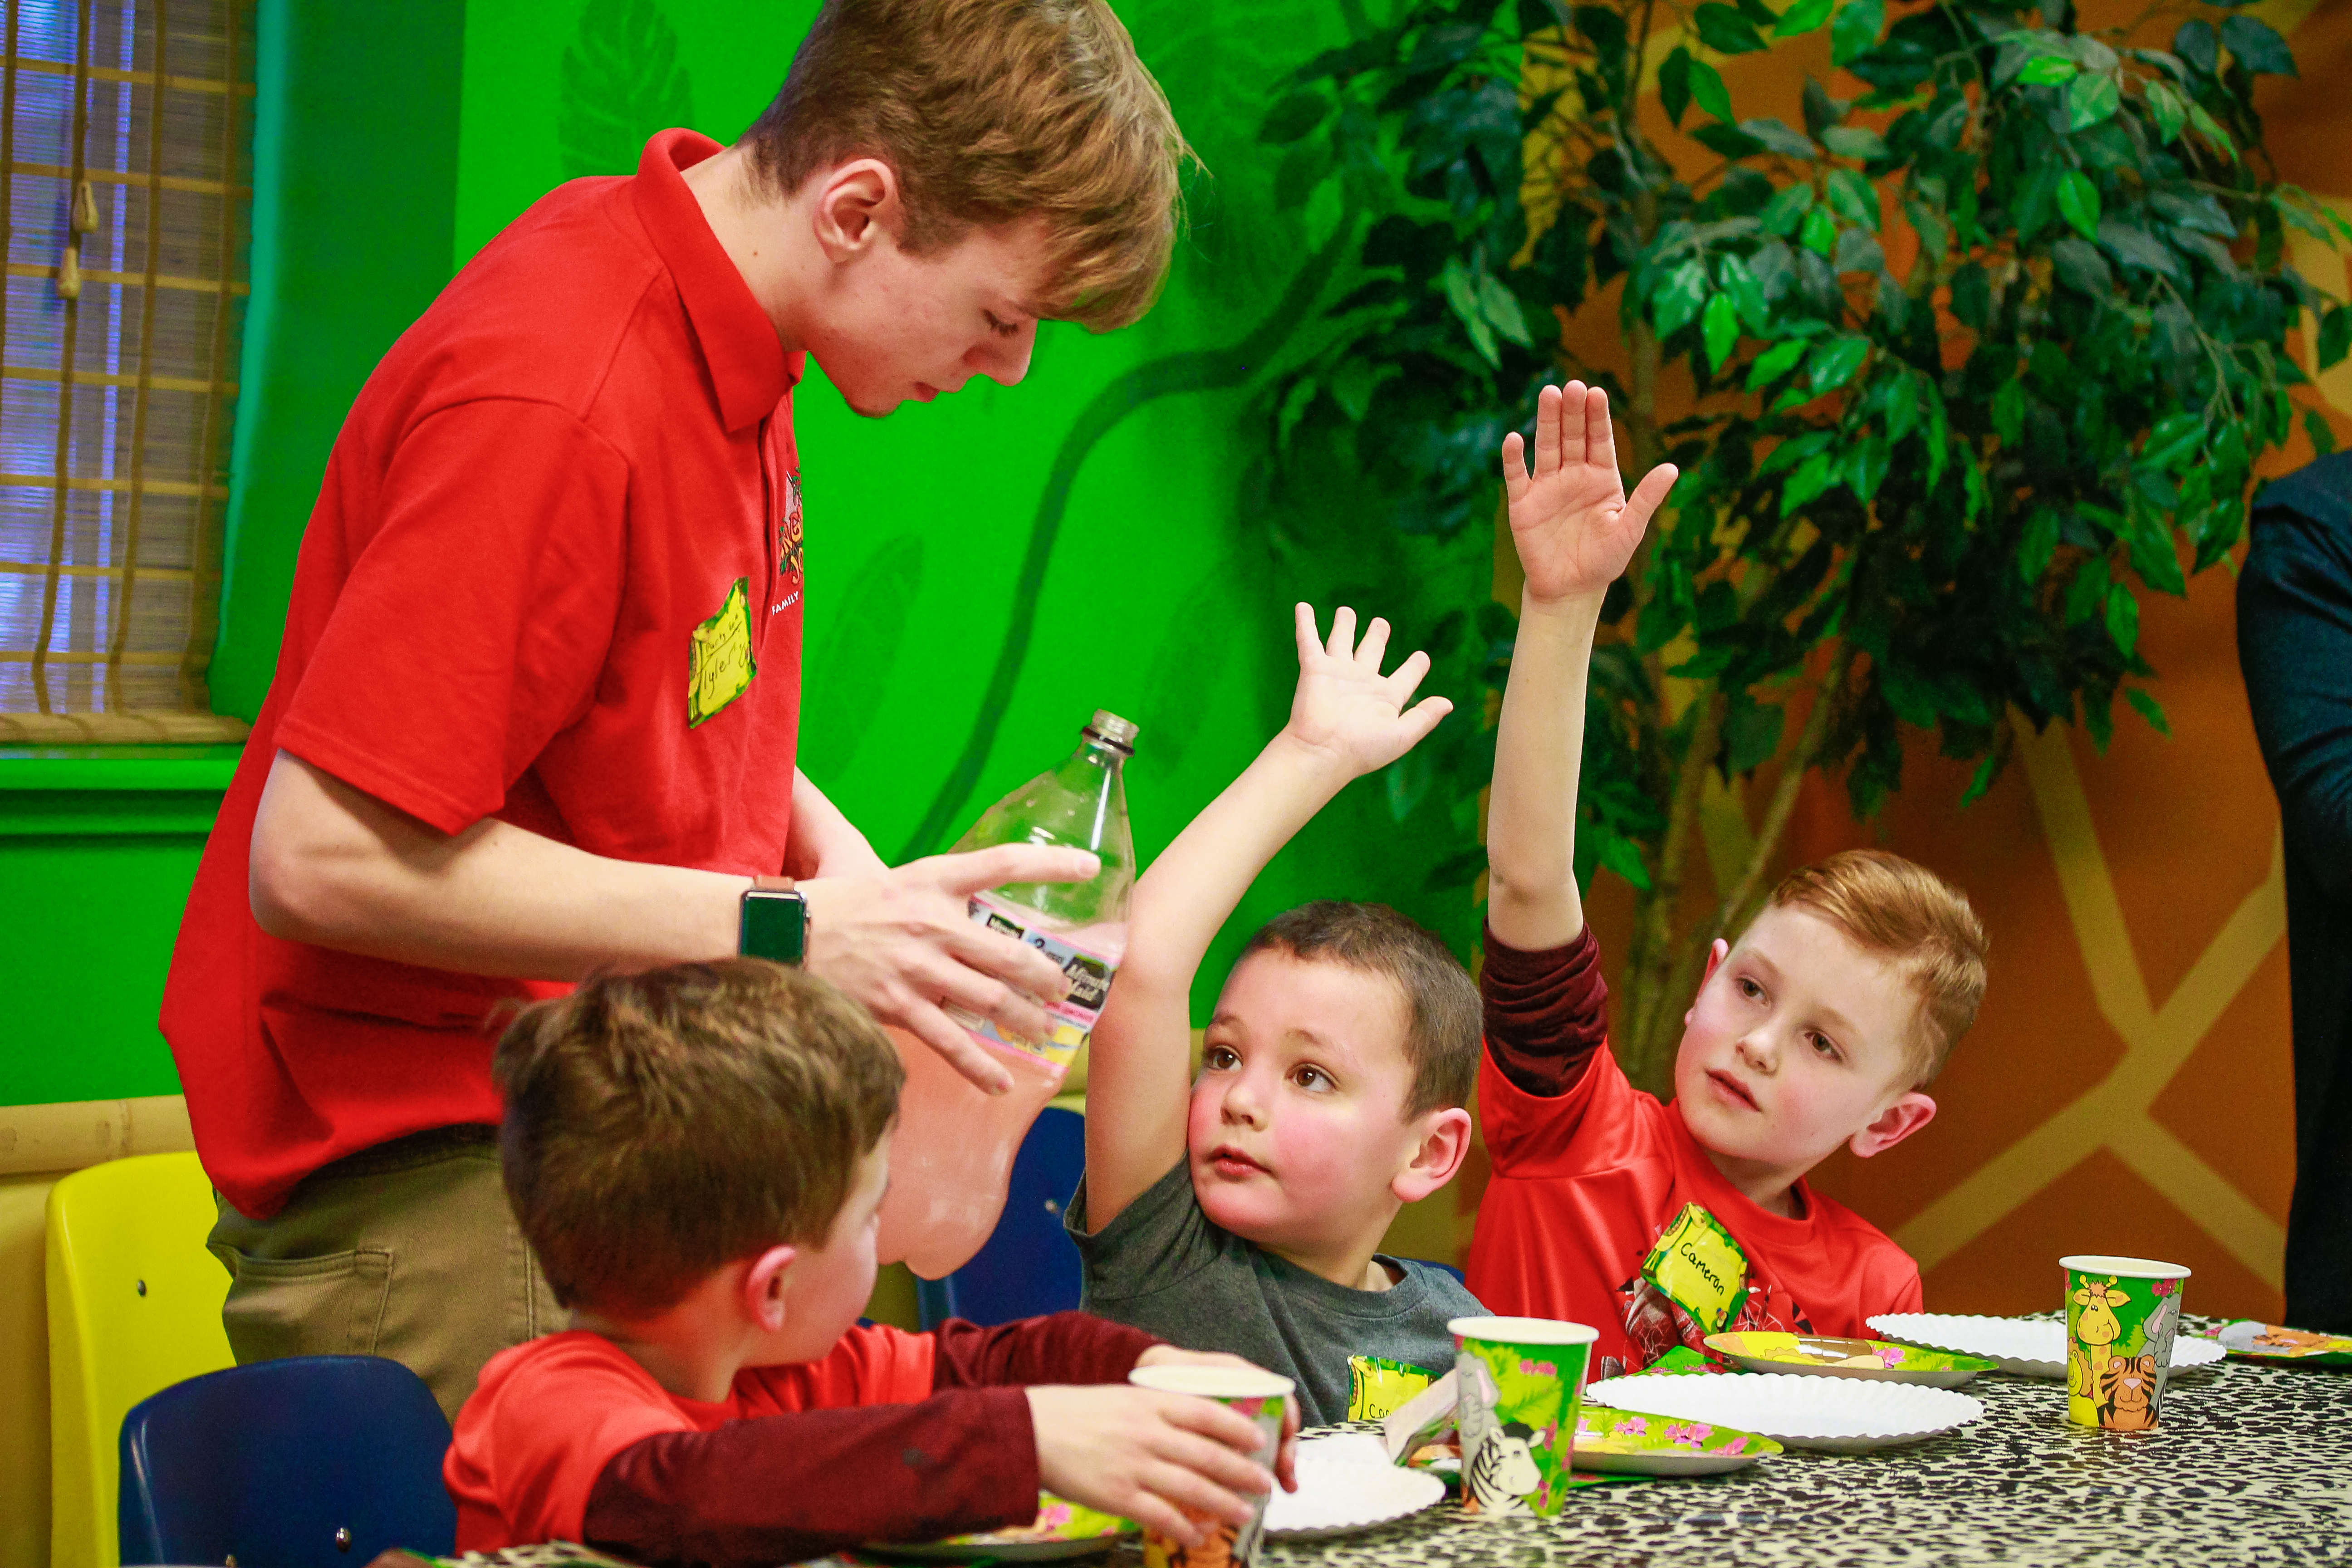 Host your child's party at Jungle Joe's